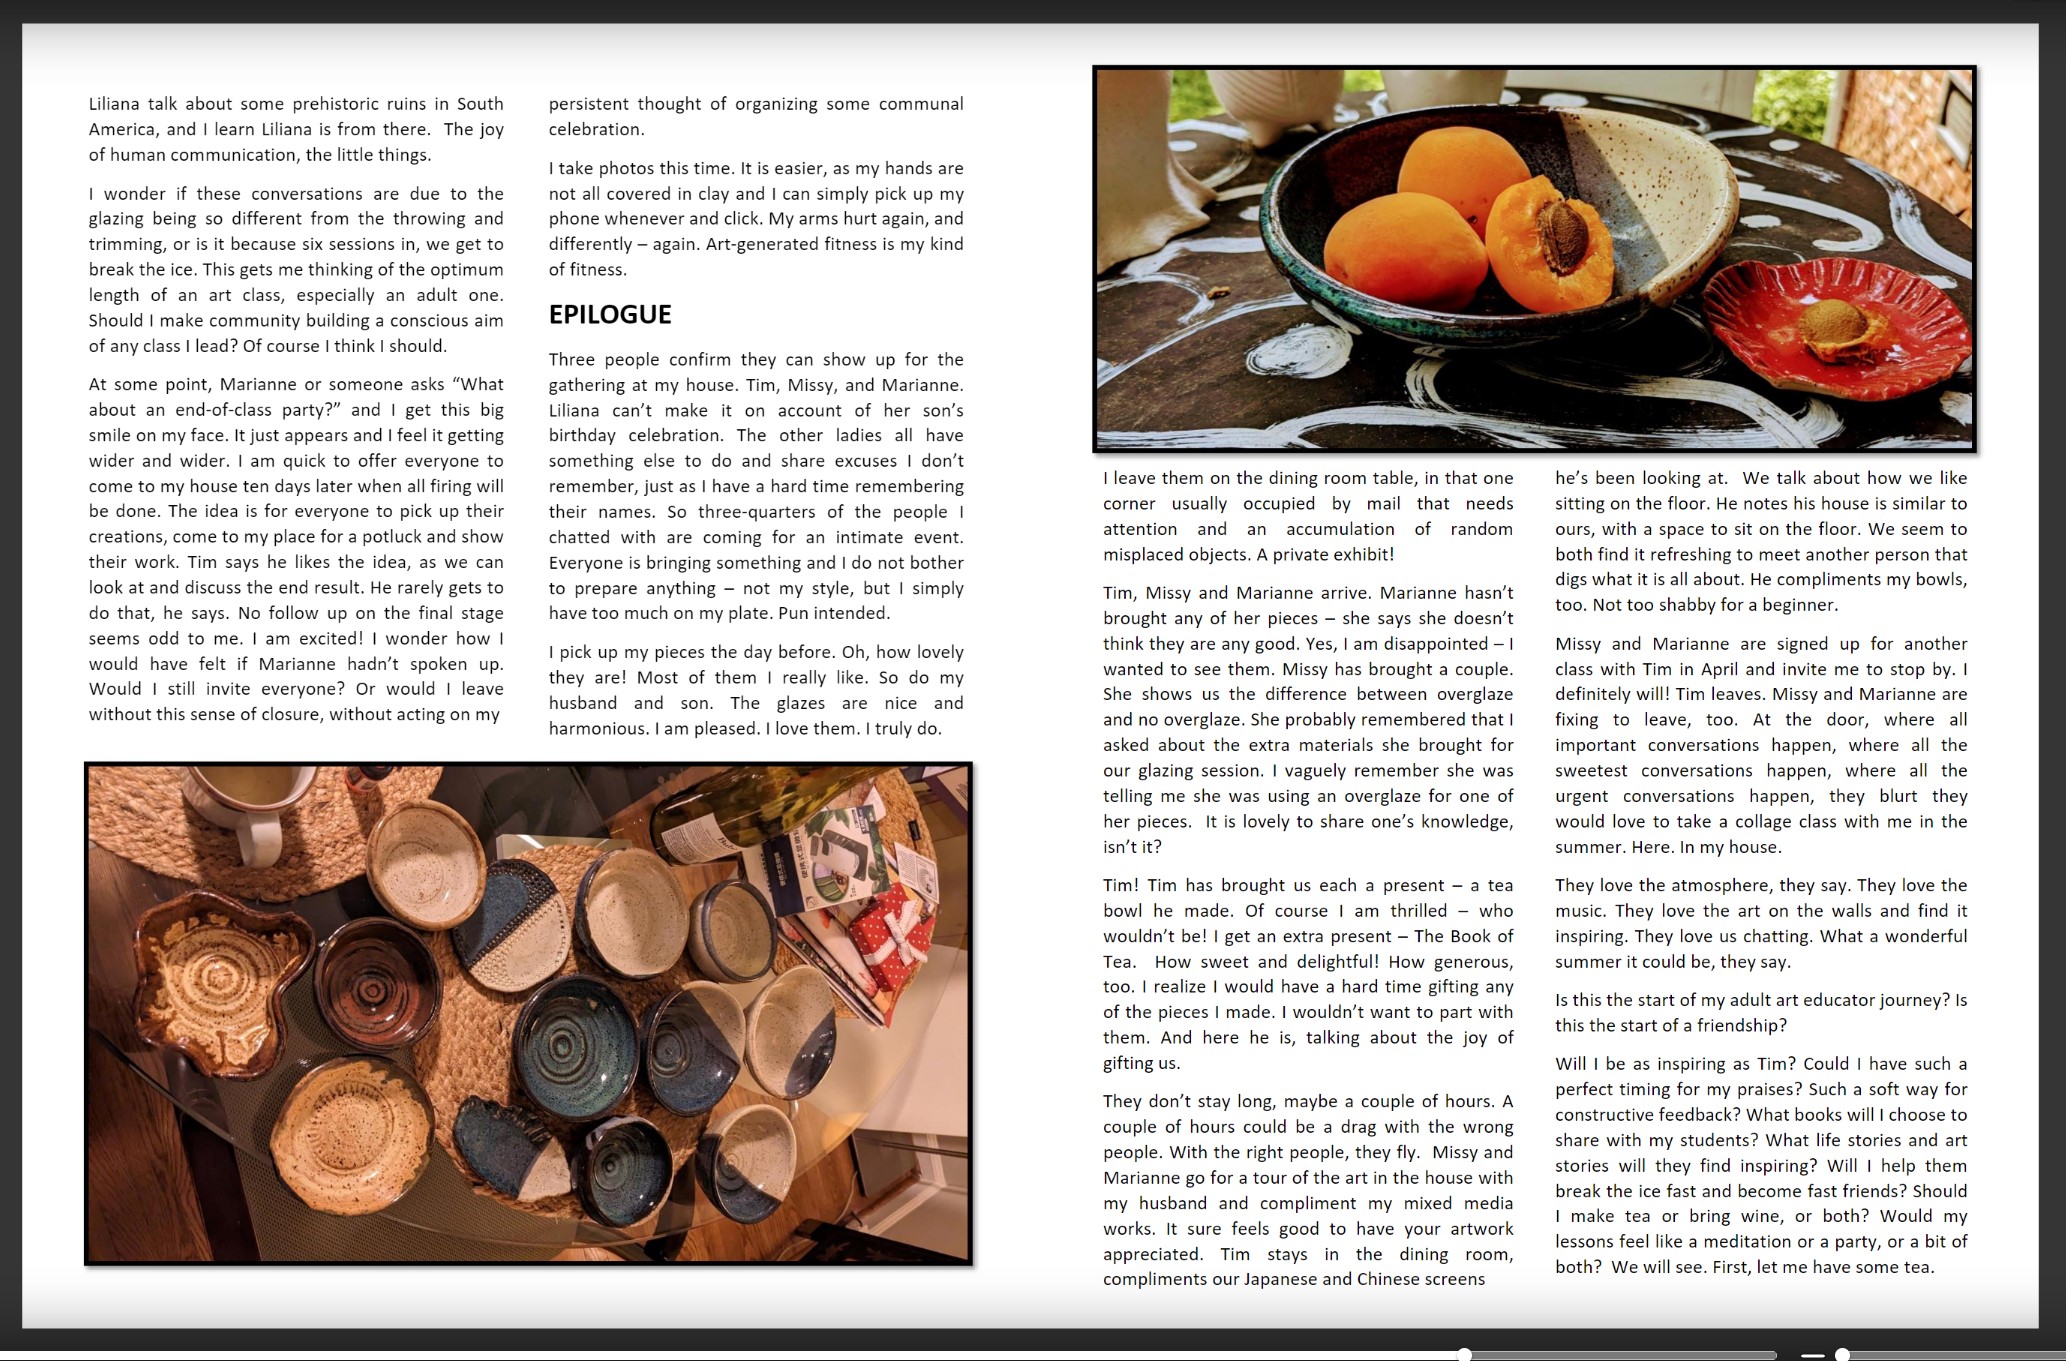 Diary of an Adult Pottery Adventure / Screenshot of pages 10 and 11 from "Diary of an Adult Pottery Adventure", an autoethnographic a/r/tography project, available to view at https://issuu.com/home/published/diary_of_an_adult_pottery_adventure_by_anna_trayko